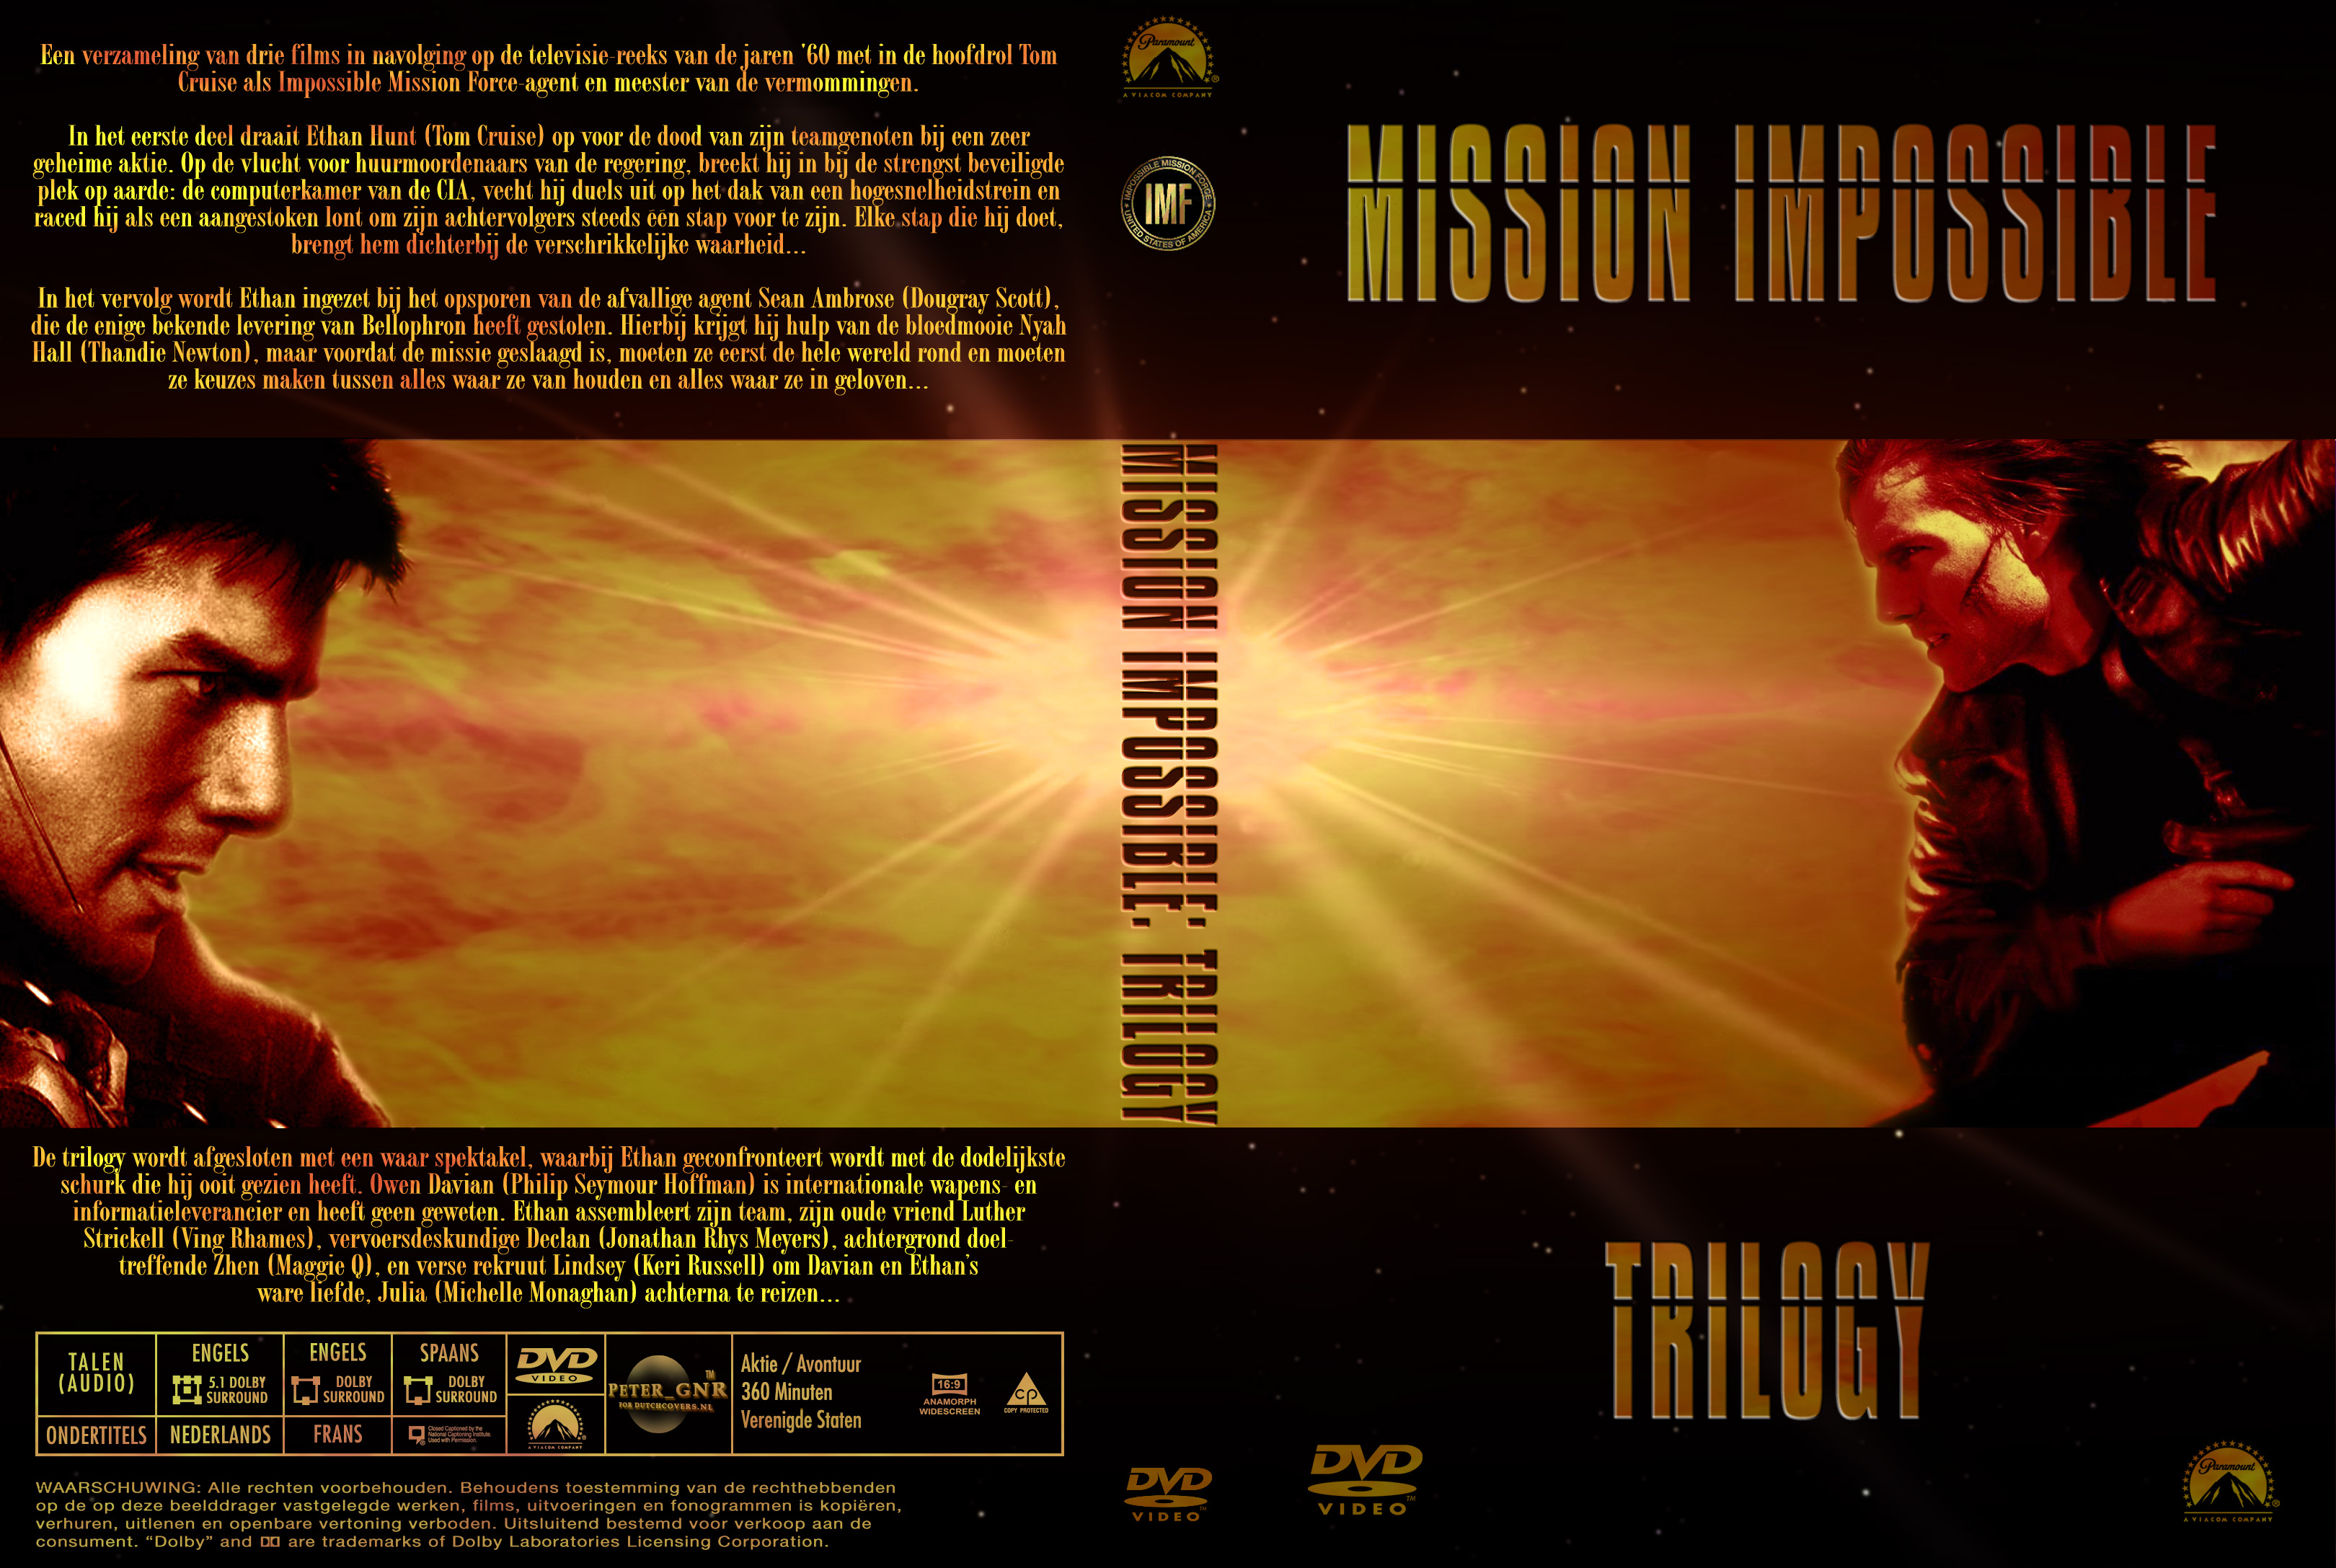 Mission Impossible trilogy